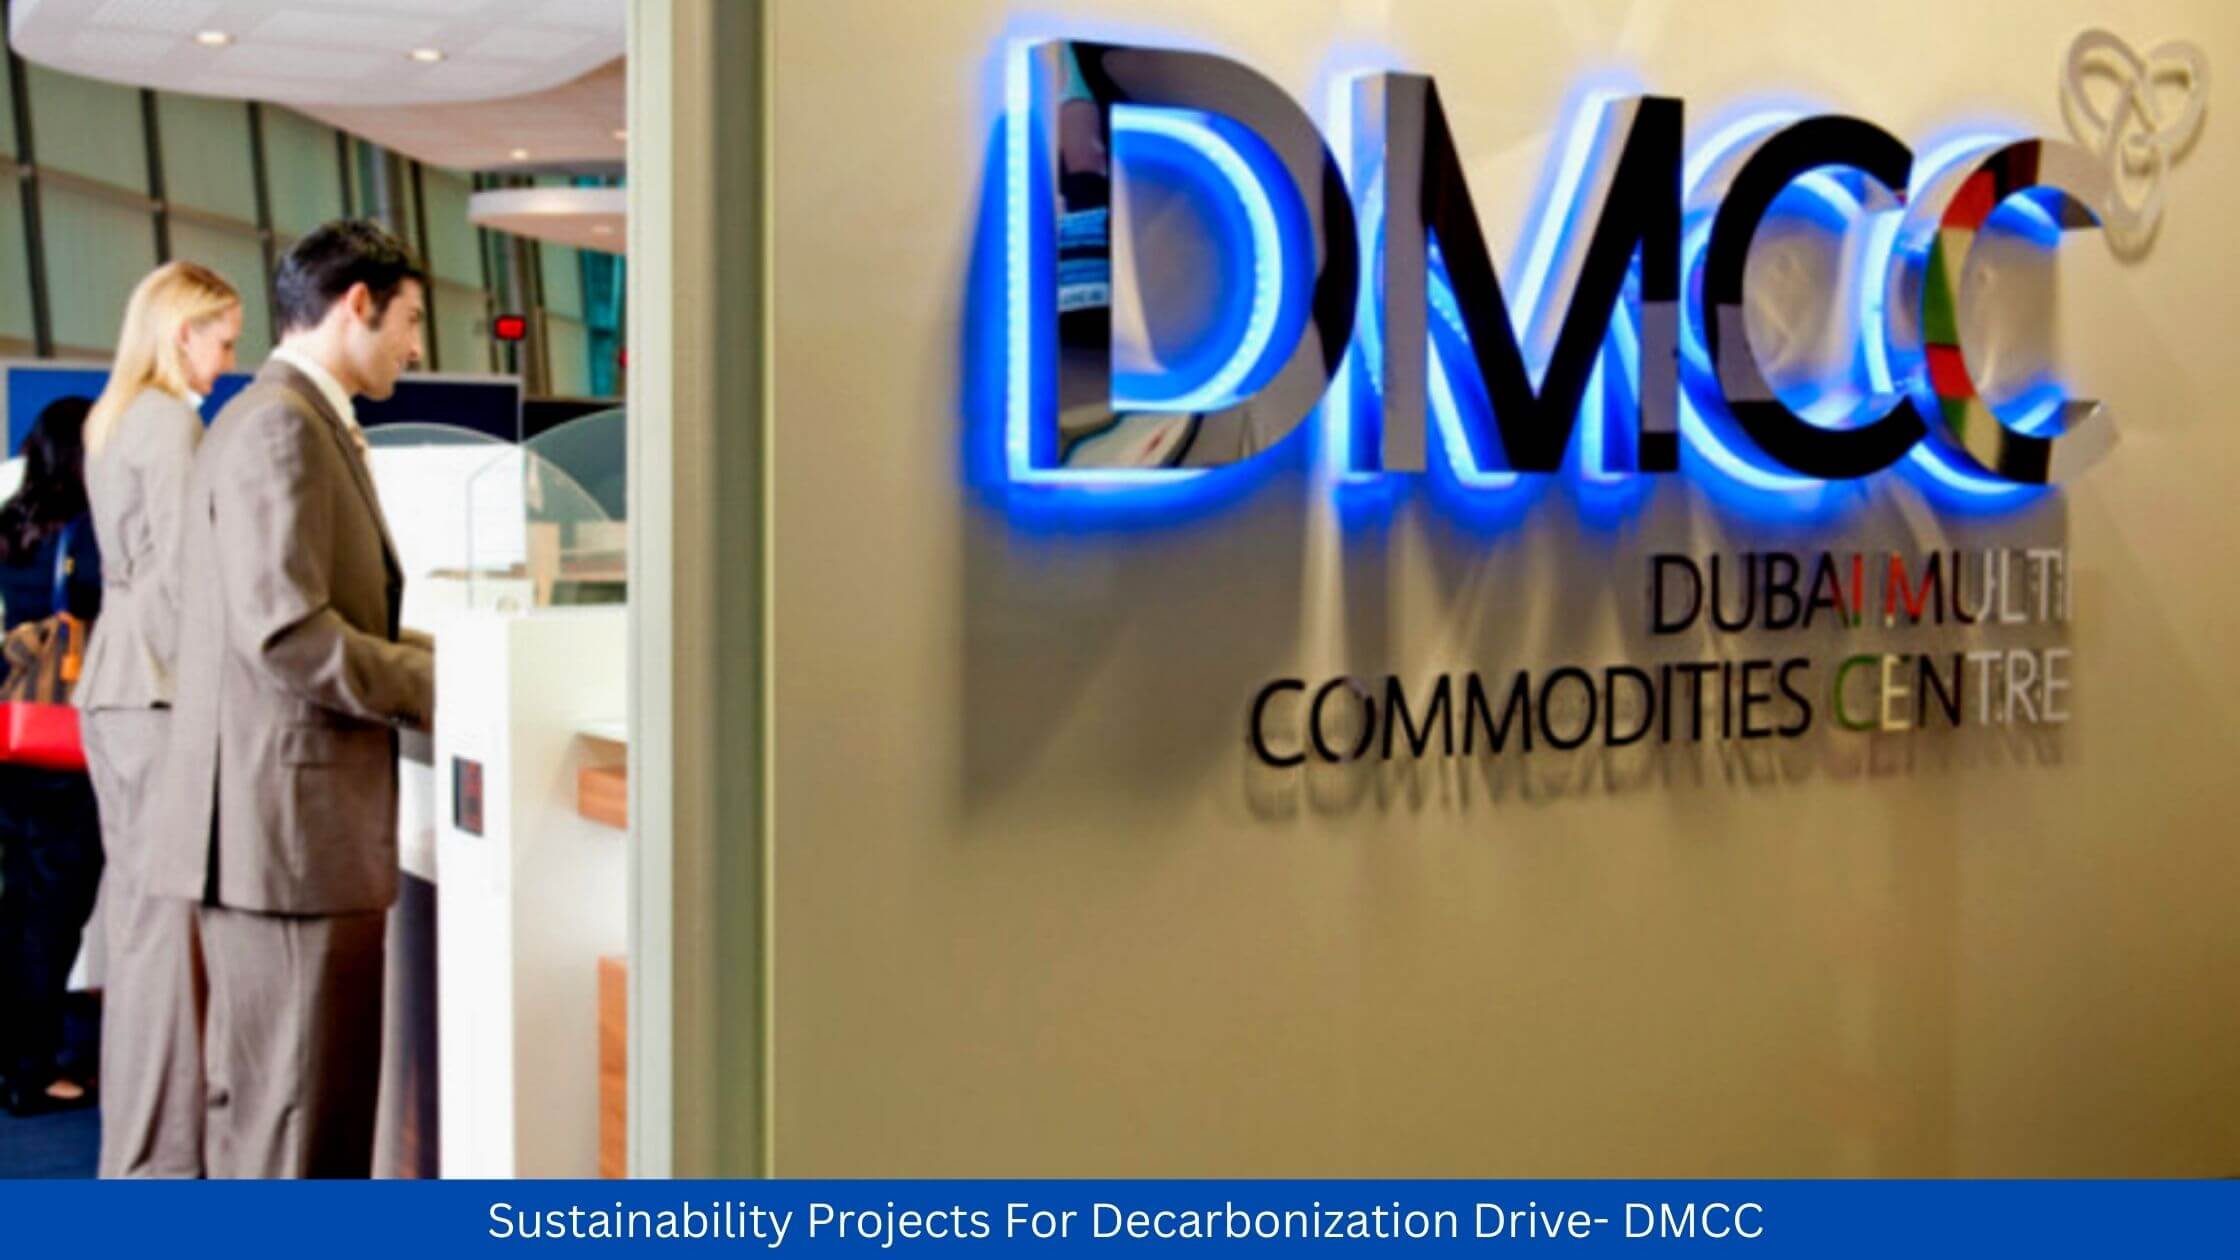 Sustainability Projects For Decarbonization Drive- DMCC